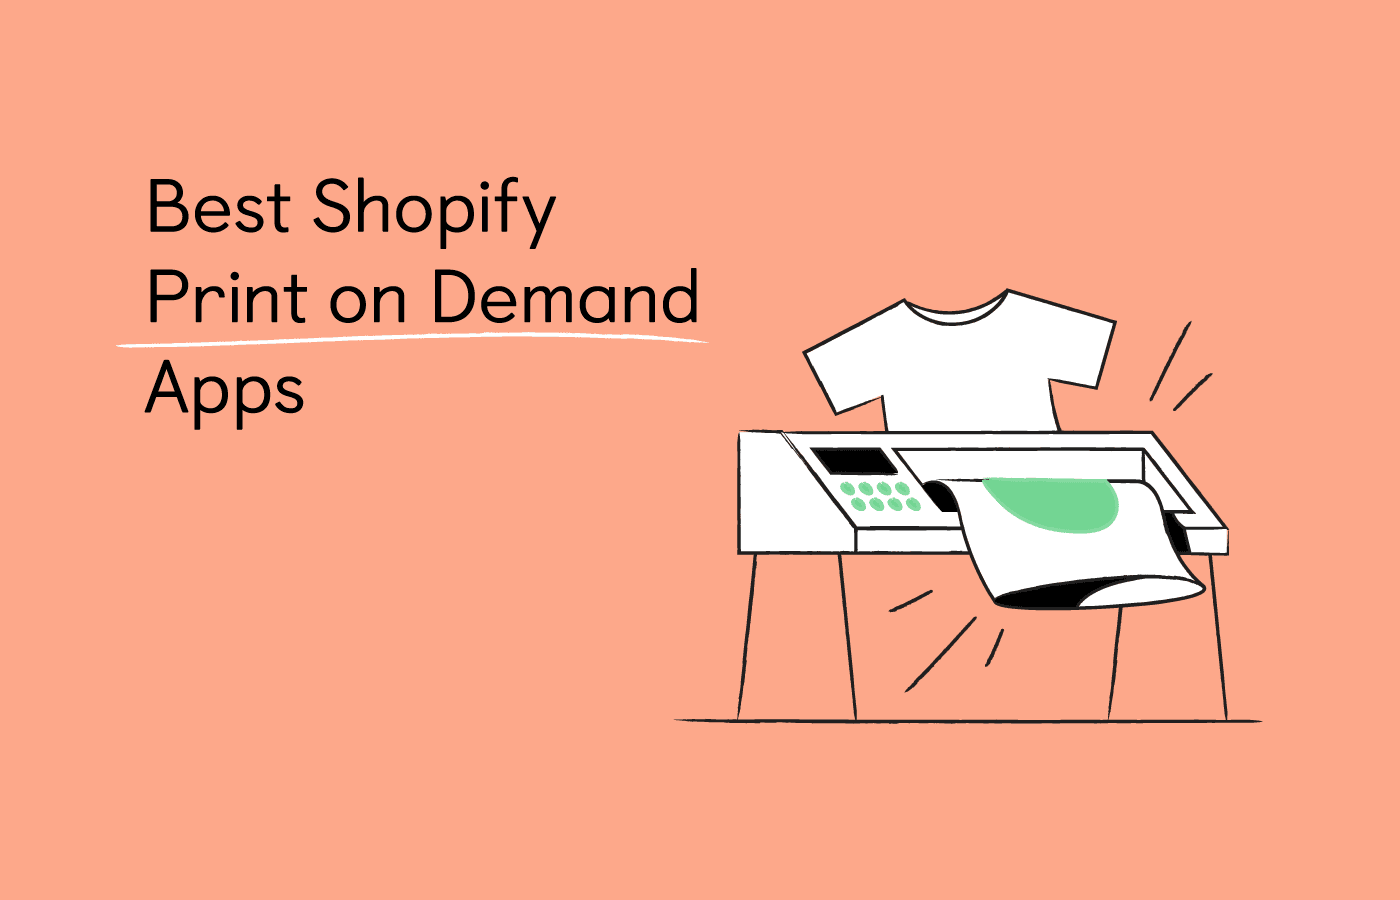 15 Shopify Print on Demand Apps to Use in 2023